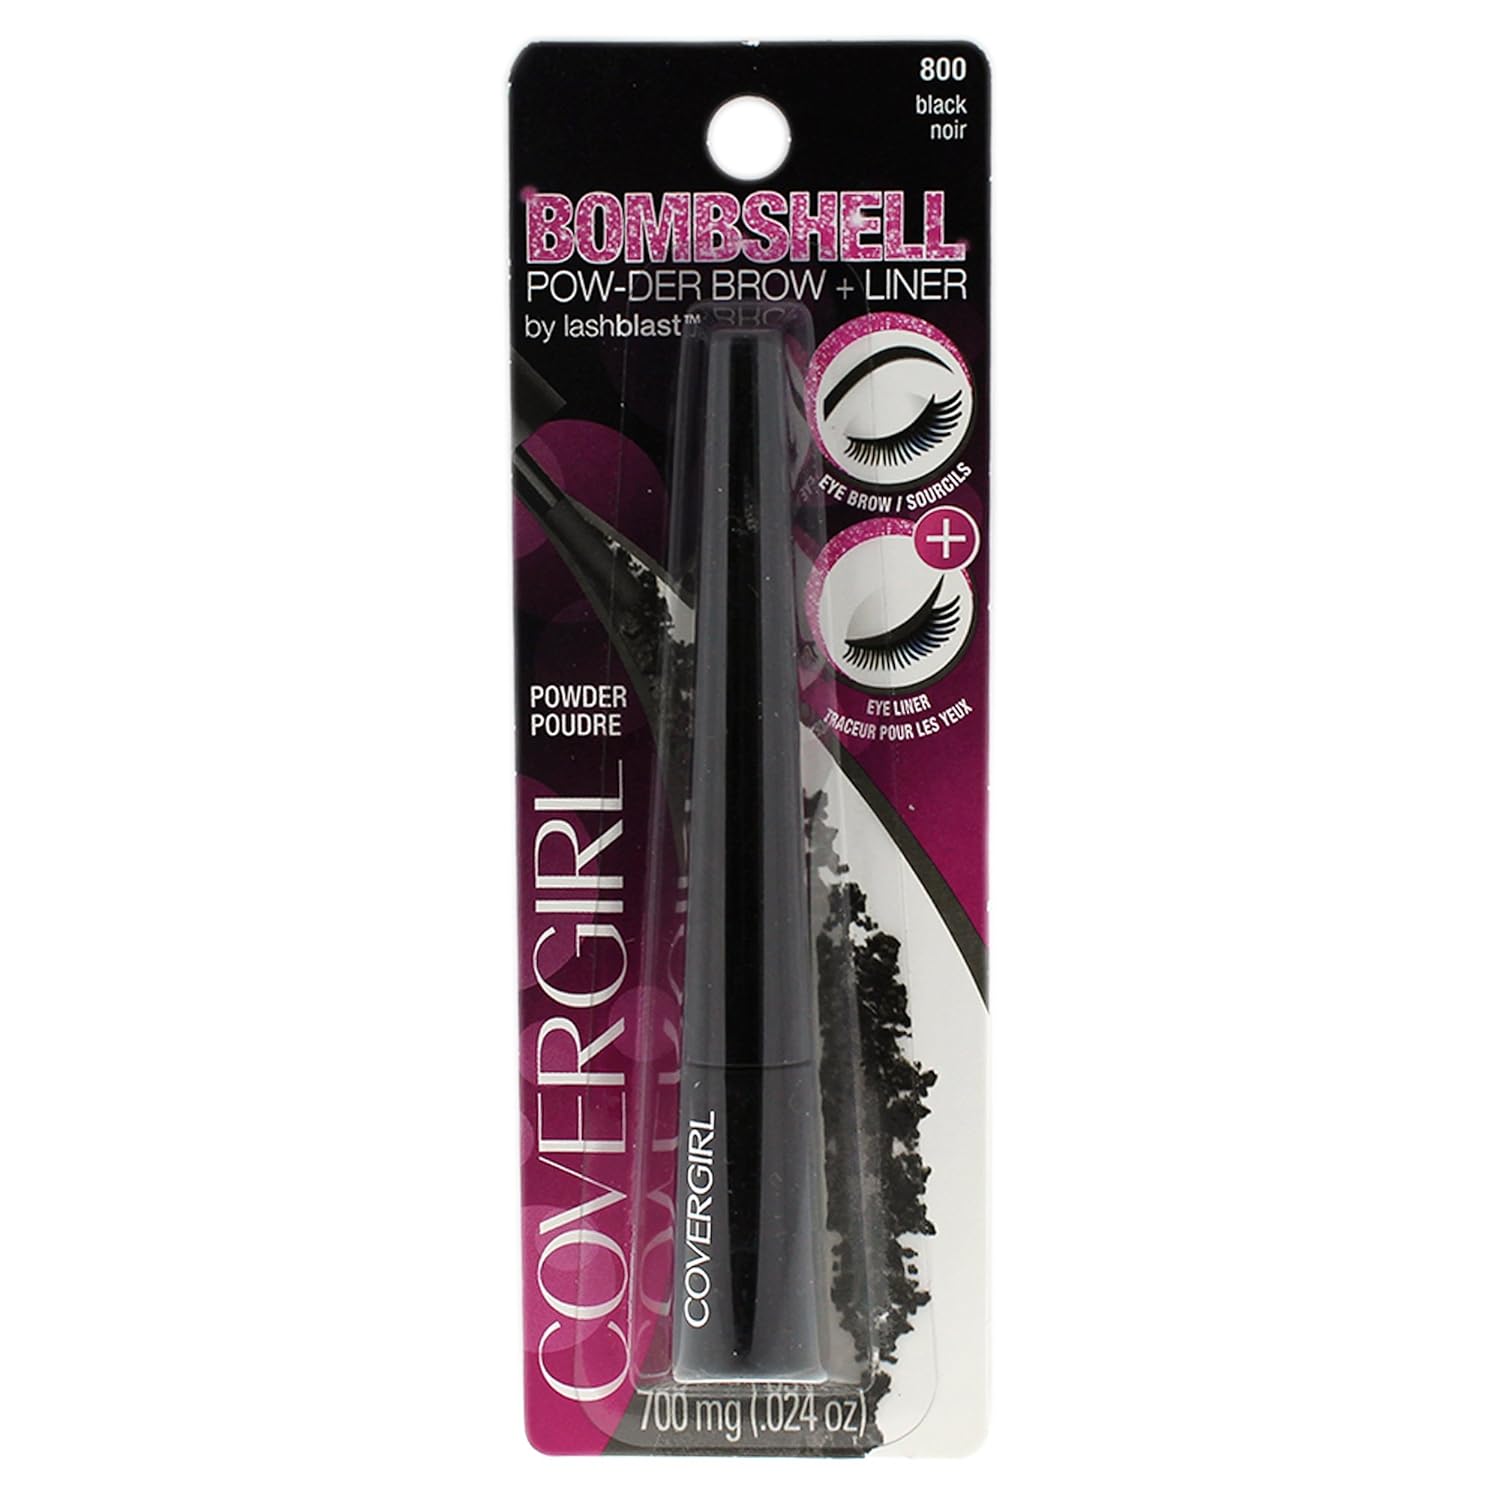 COVERGIRL Bombshell POW-der Brow & Liner Eyebrow Powder Black 800, .24  (packaging may vary)